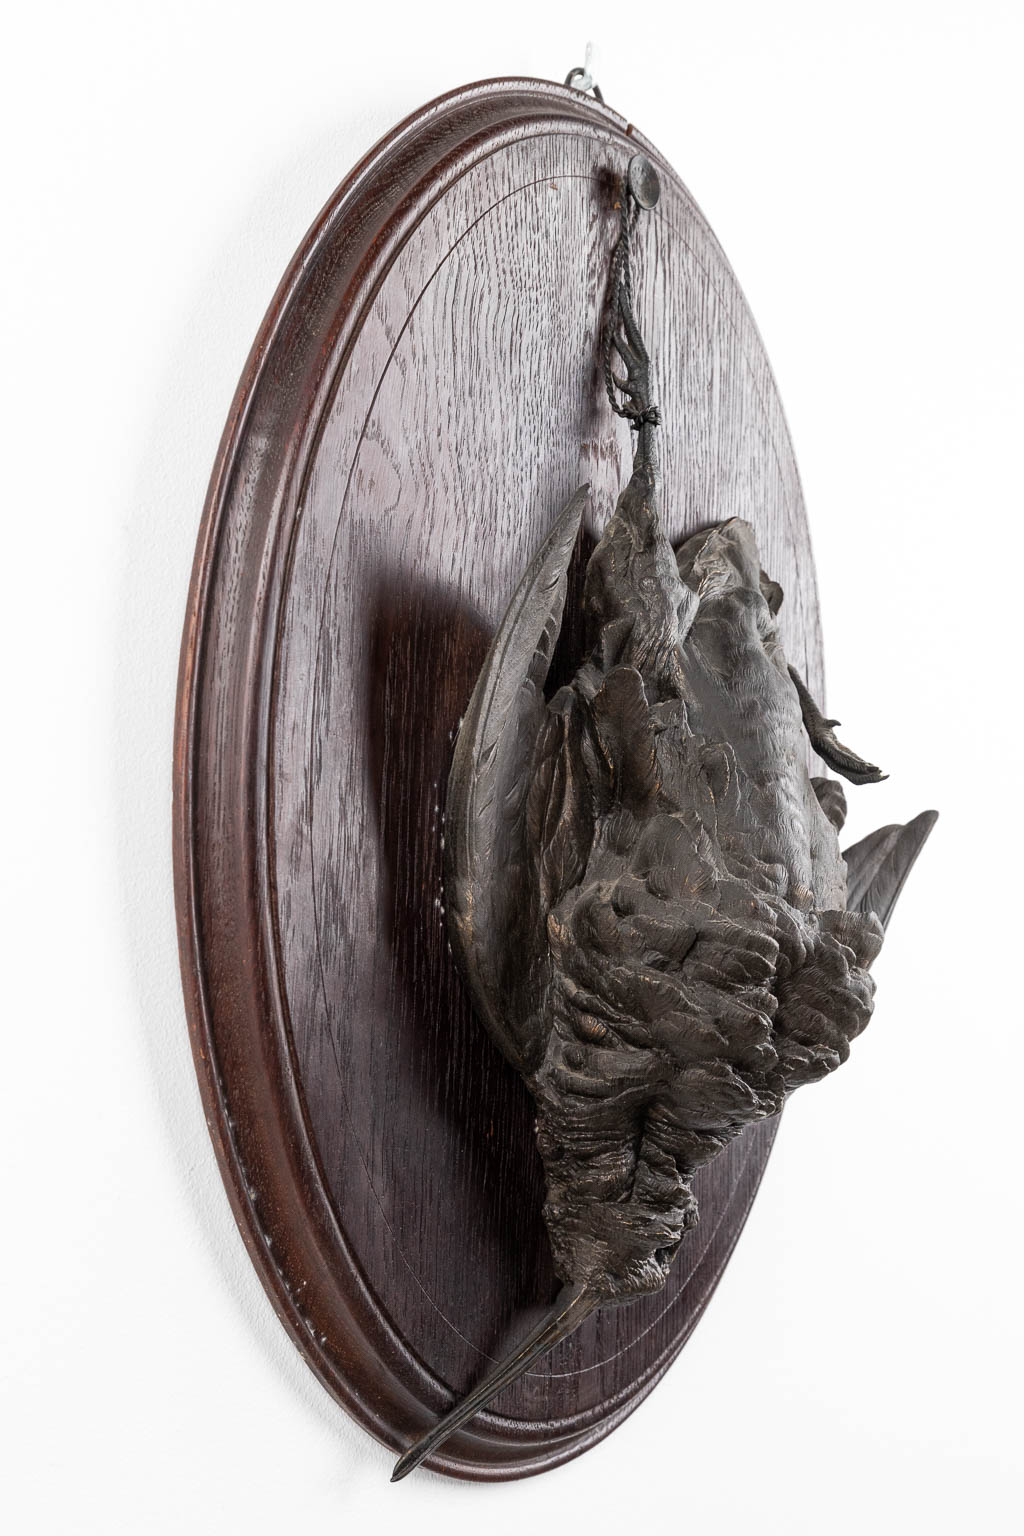 A pair of wall-mounted 'Hunting Trophies', patinated bronze mounted on wood. (D:7 x W:33 x H:46 cm) - Image 7 of 15